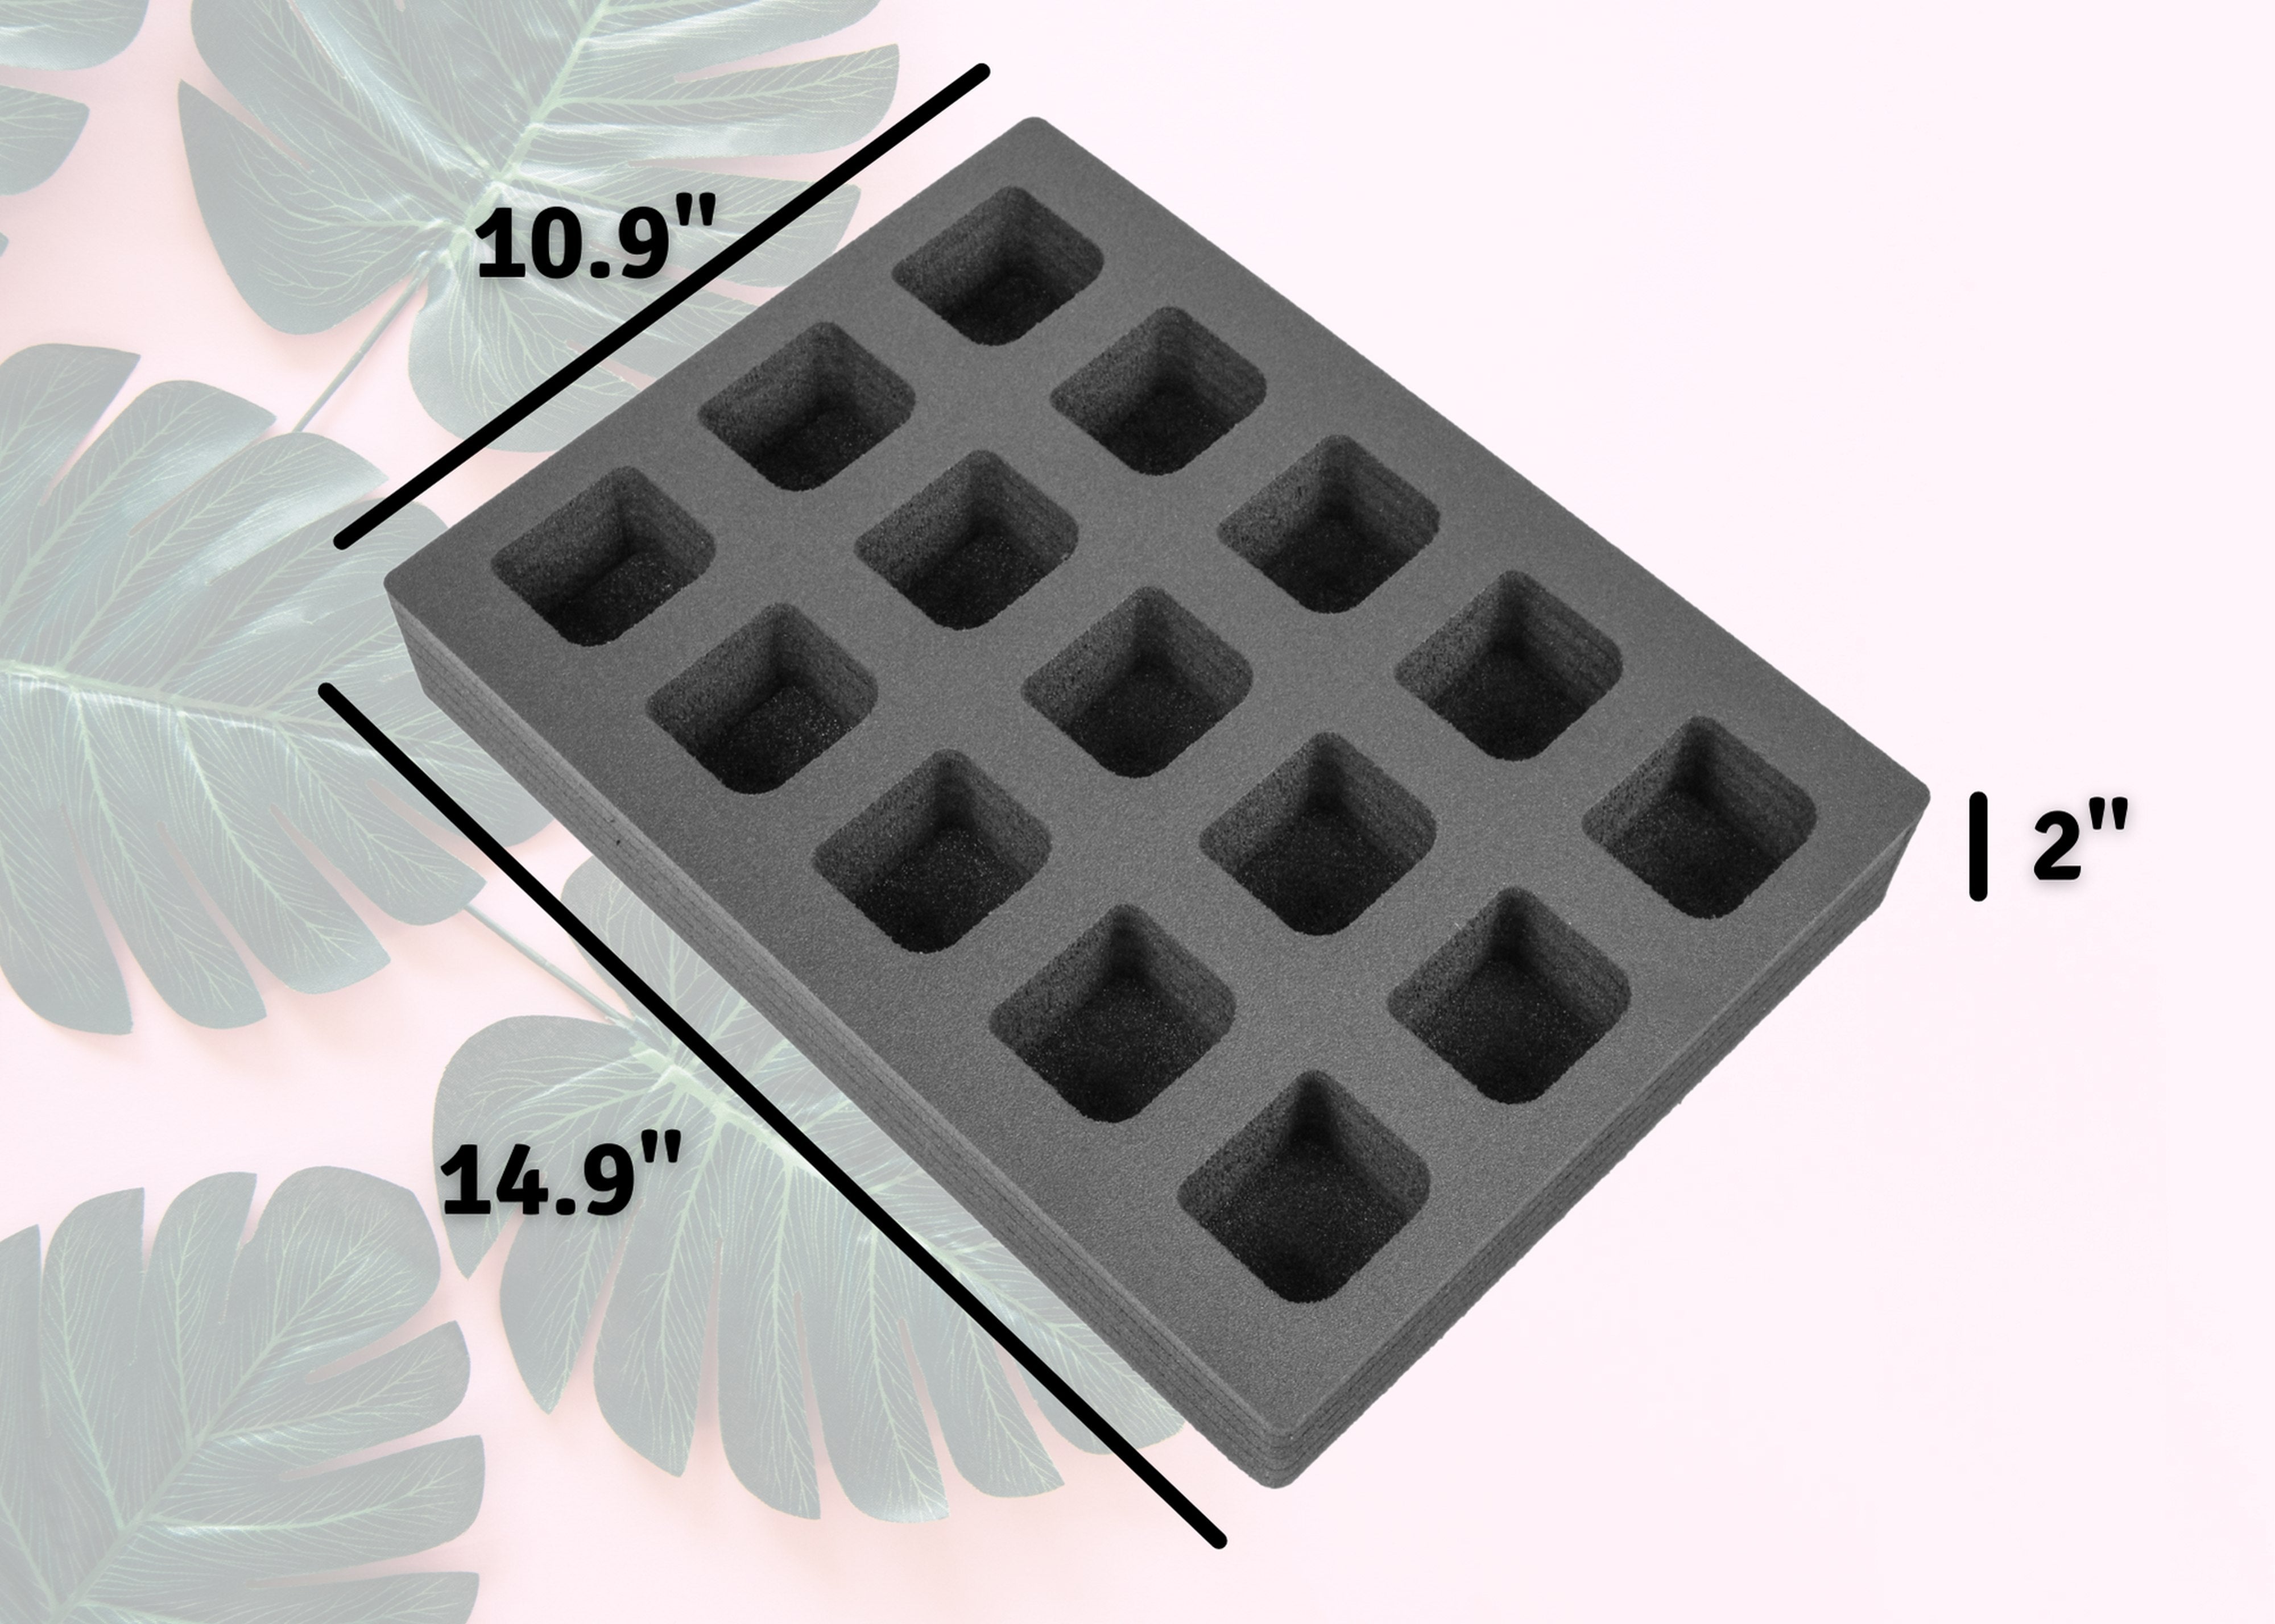 Cocktail Capsule Drawer Tray Insert Compatible Keurig DrinkWorks Pods for Kitchen Home Bar Party Waterproof Foam 15 Compartment 10.9 x 14.9 Inches